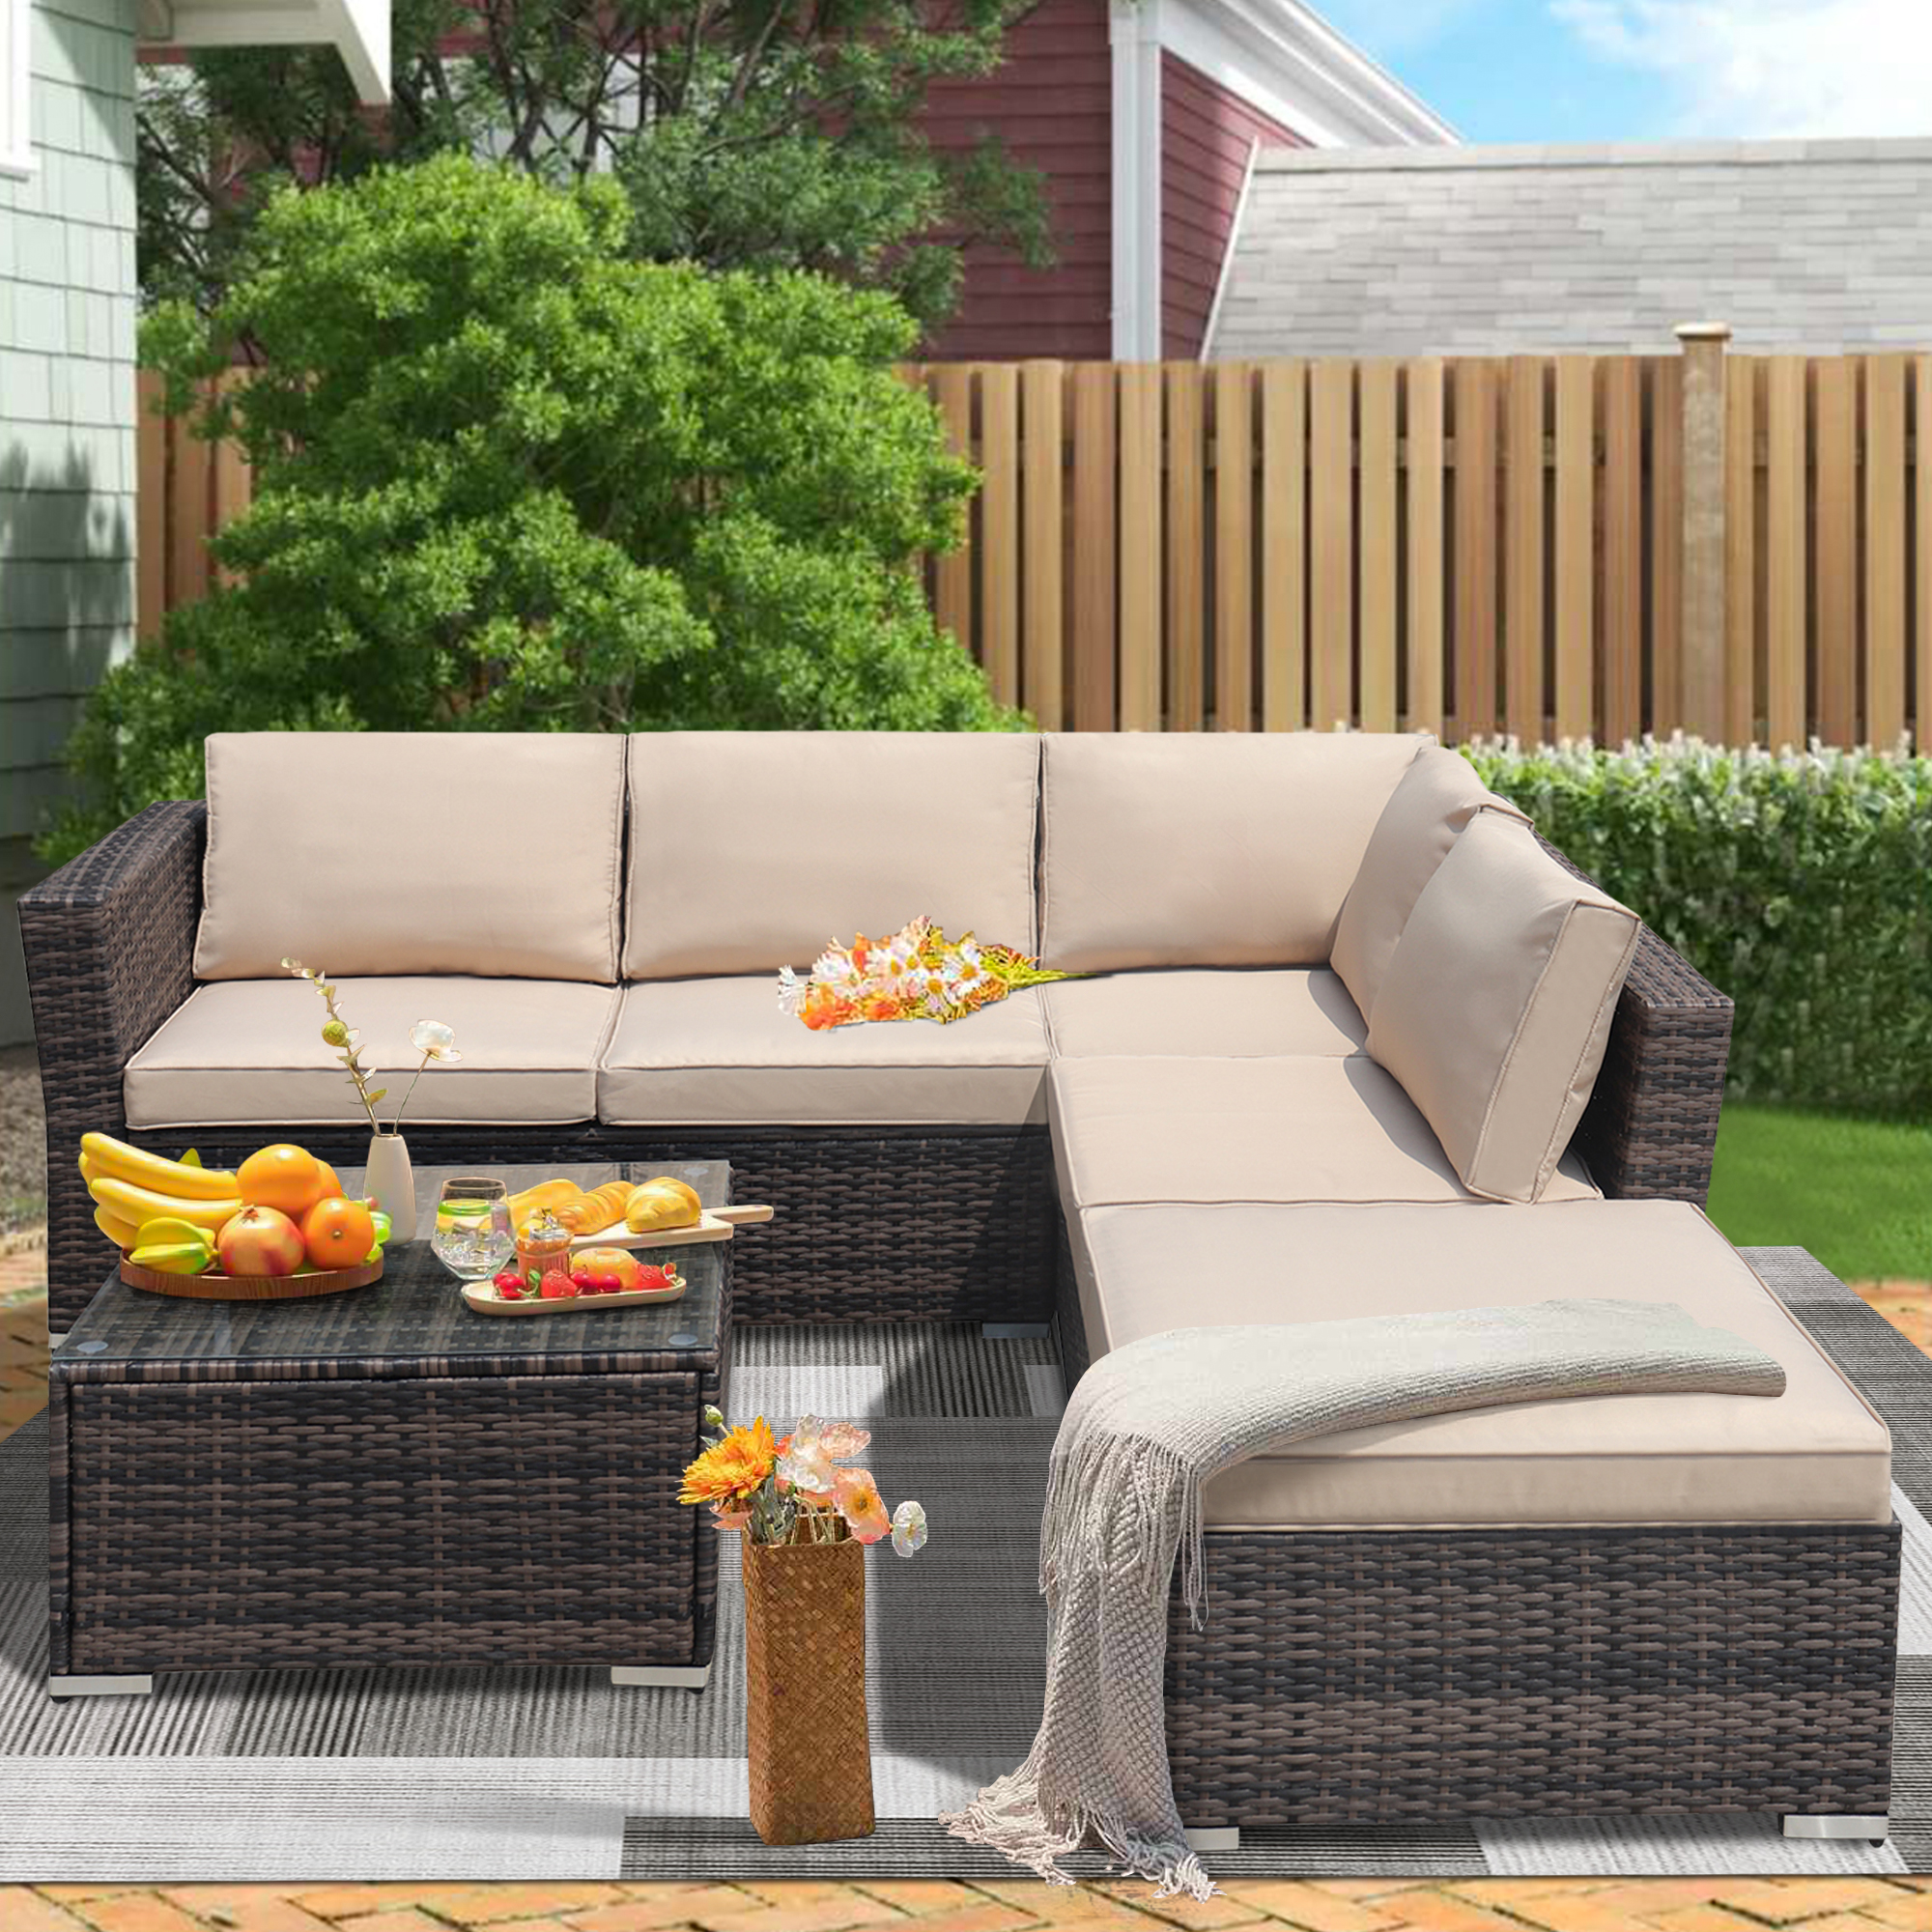 Outdoor Conversation Sets, 4 Piece Patio Furniture Sets with Loveseat Sofa, Lounge Chair, Wicker Chair, Coffee Table, Patio Sectional Sofa Set with Cushions for Backyard Garden Pool, LLL1326 - image 1 of 9